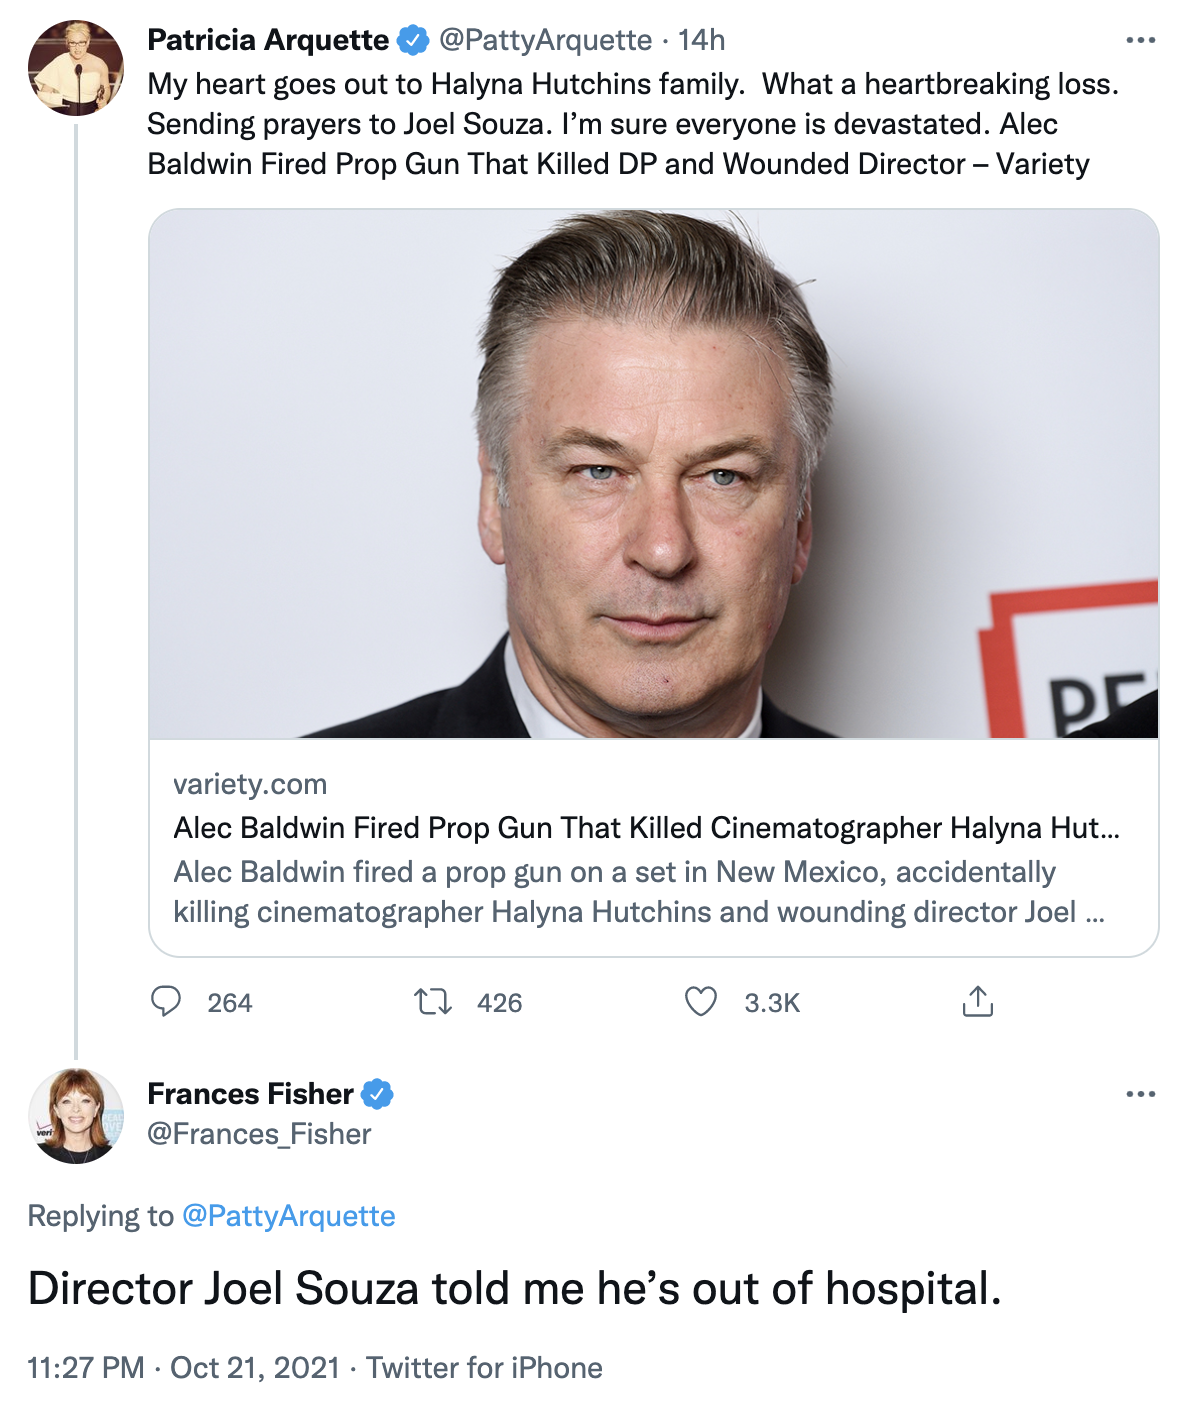 Frances Fisher said Thursday night that Joel Souza had been released from the hospital. (Photo: Twitter)